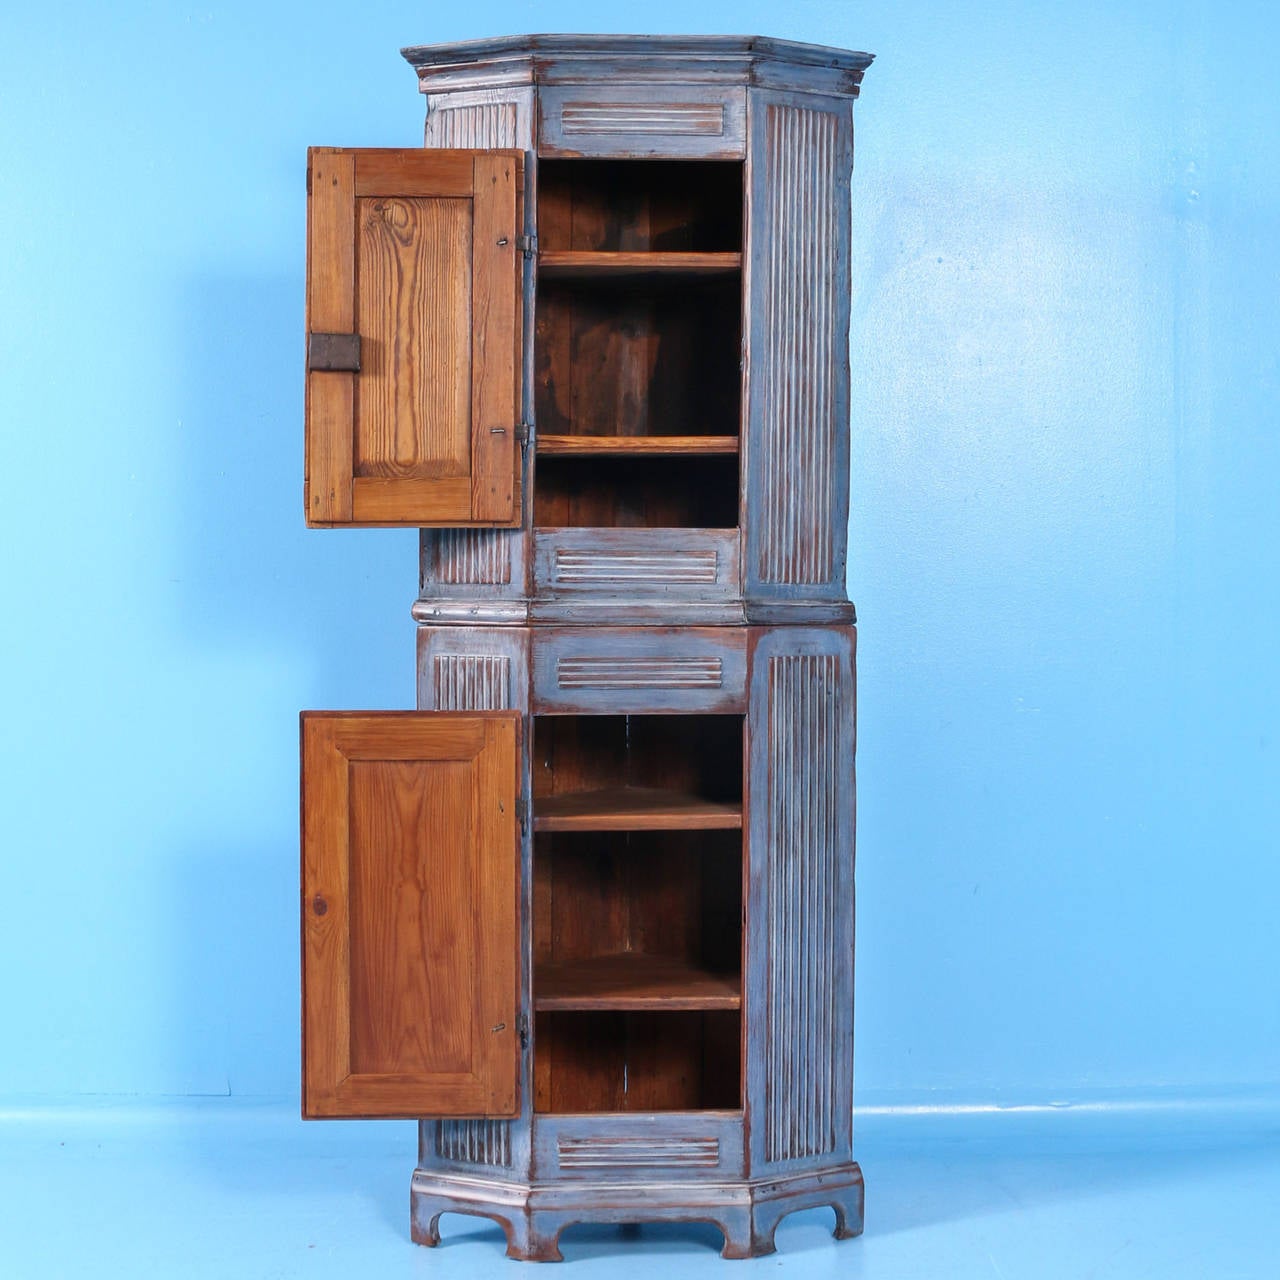 Charming narrow pine Swedish Gustavian period corner cabinet with dentil carved details along all panels. It has recently been given a soft blue painted finish, gently distressed to maintain the Gustavian look of the piece. This is a truly